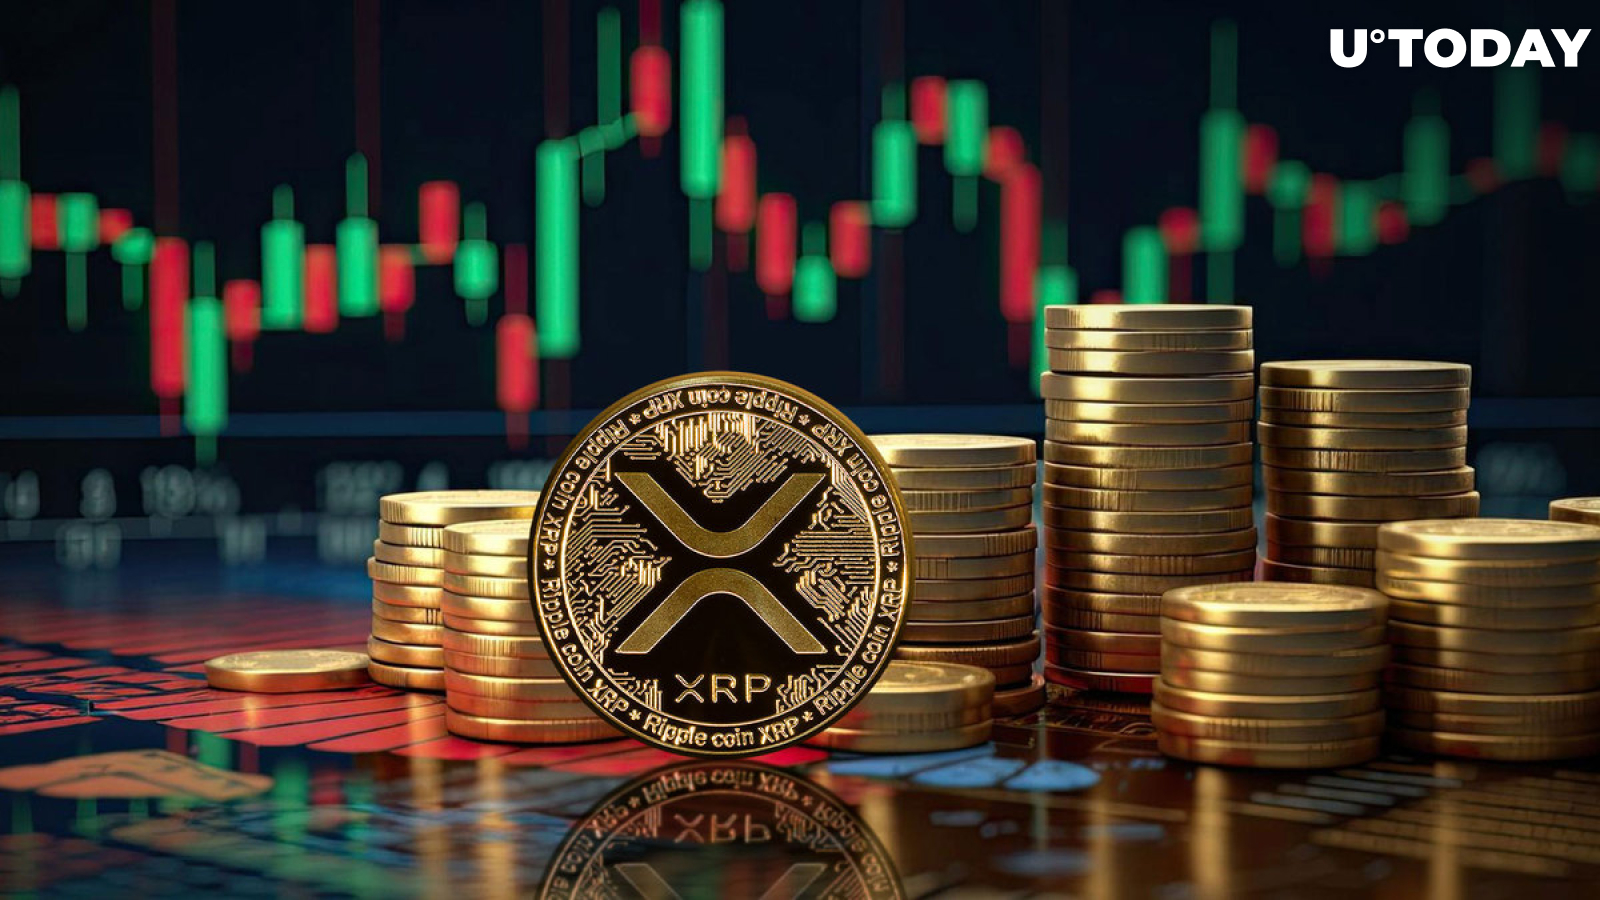 XRP Price Action Puts Bulls 6,880% Above Bears, But There's a Catch